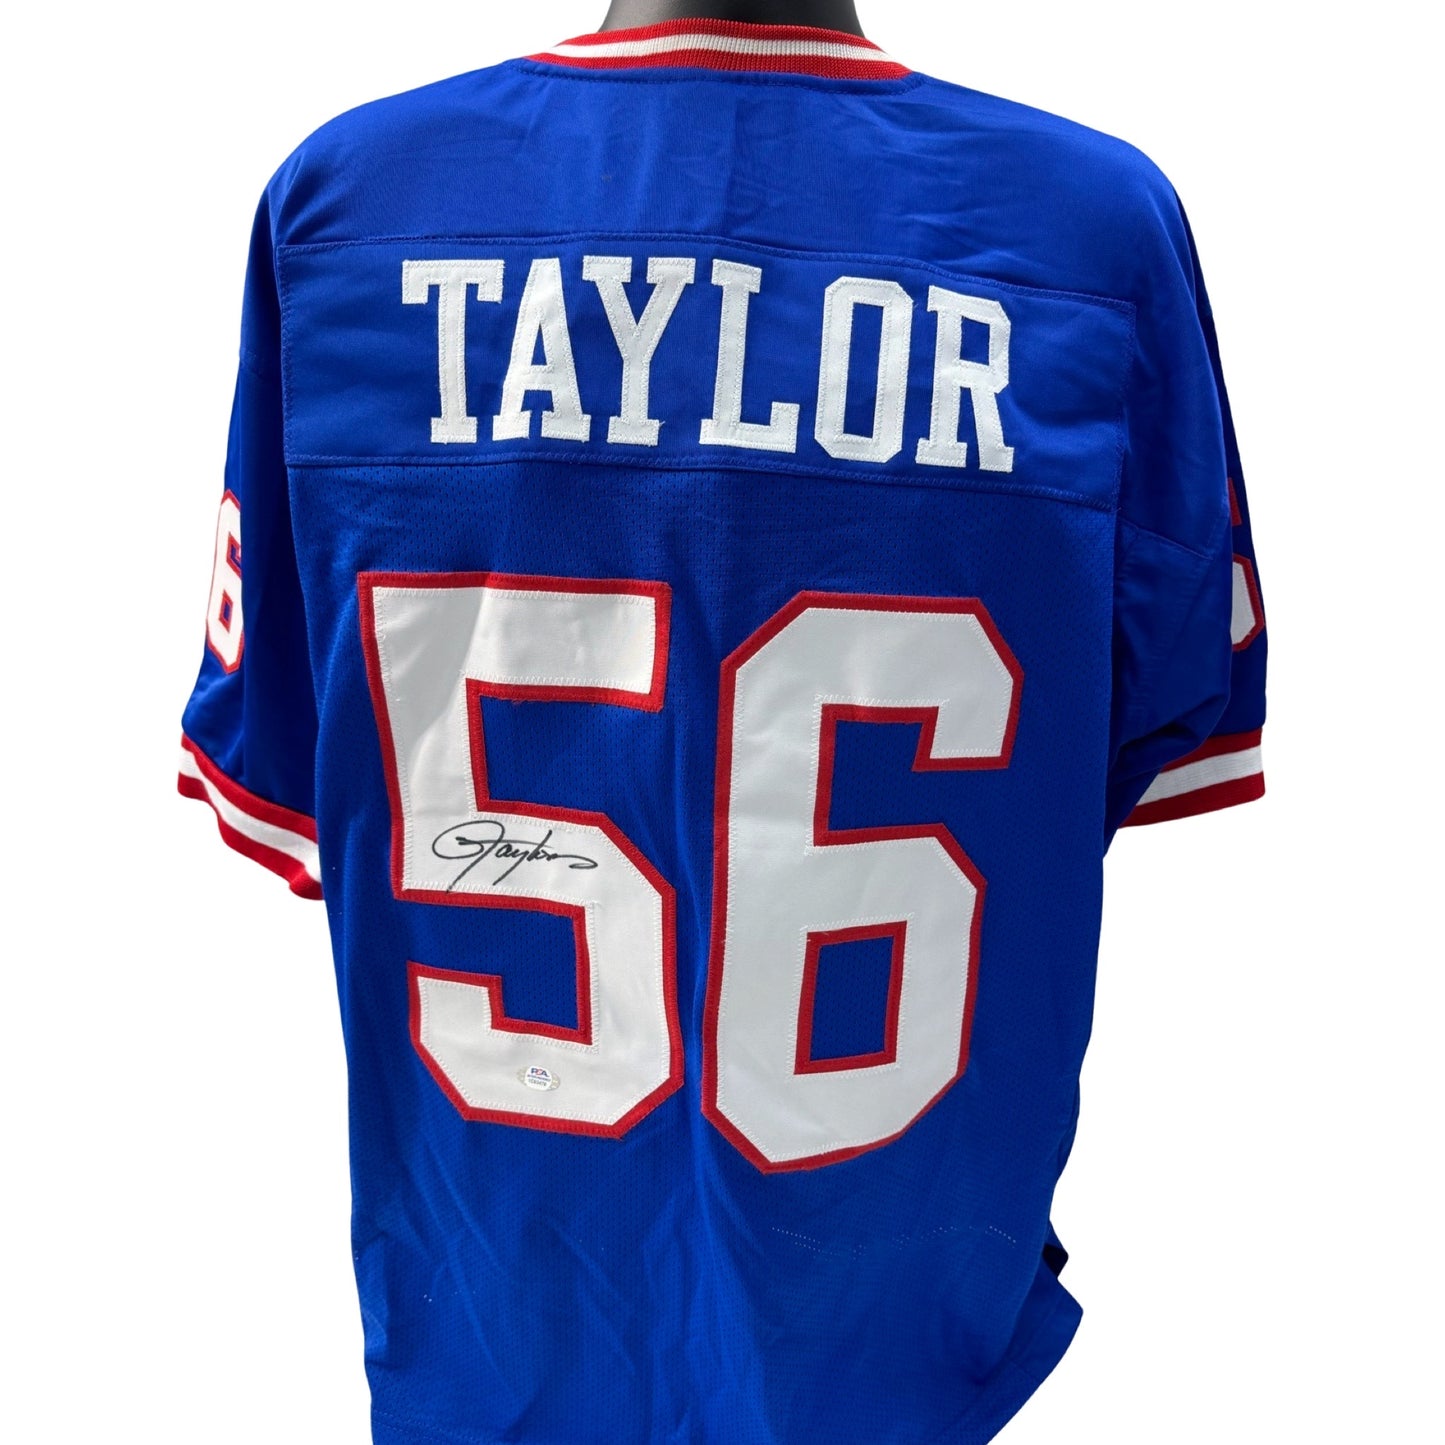 Lawrence Taylor Autographed New York Giants Blue Jersey PSA